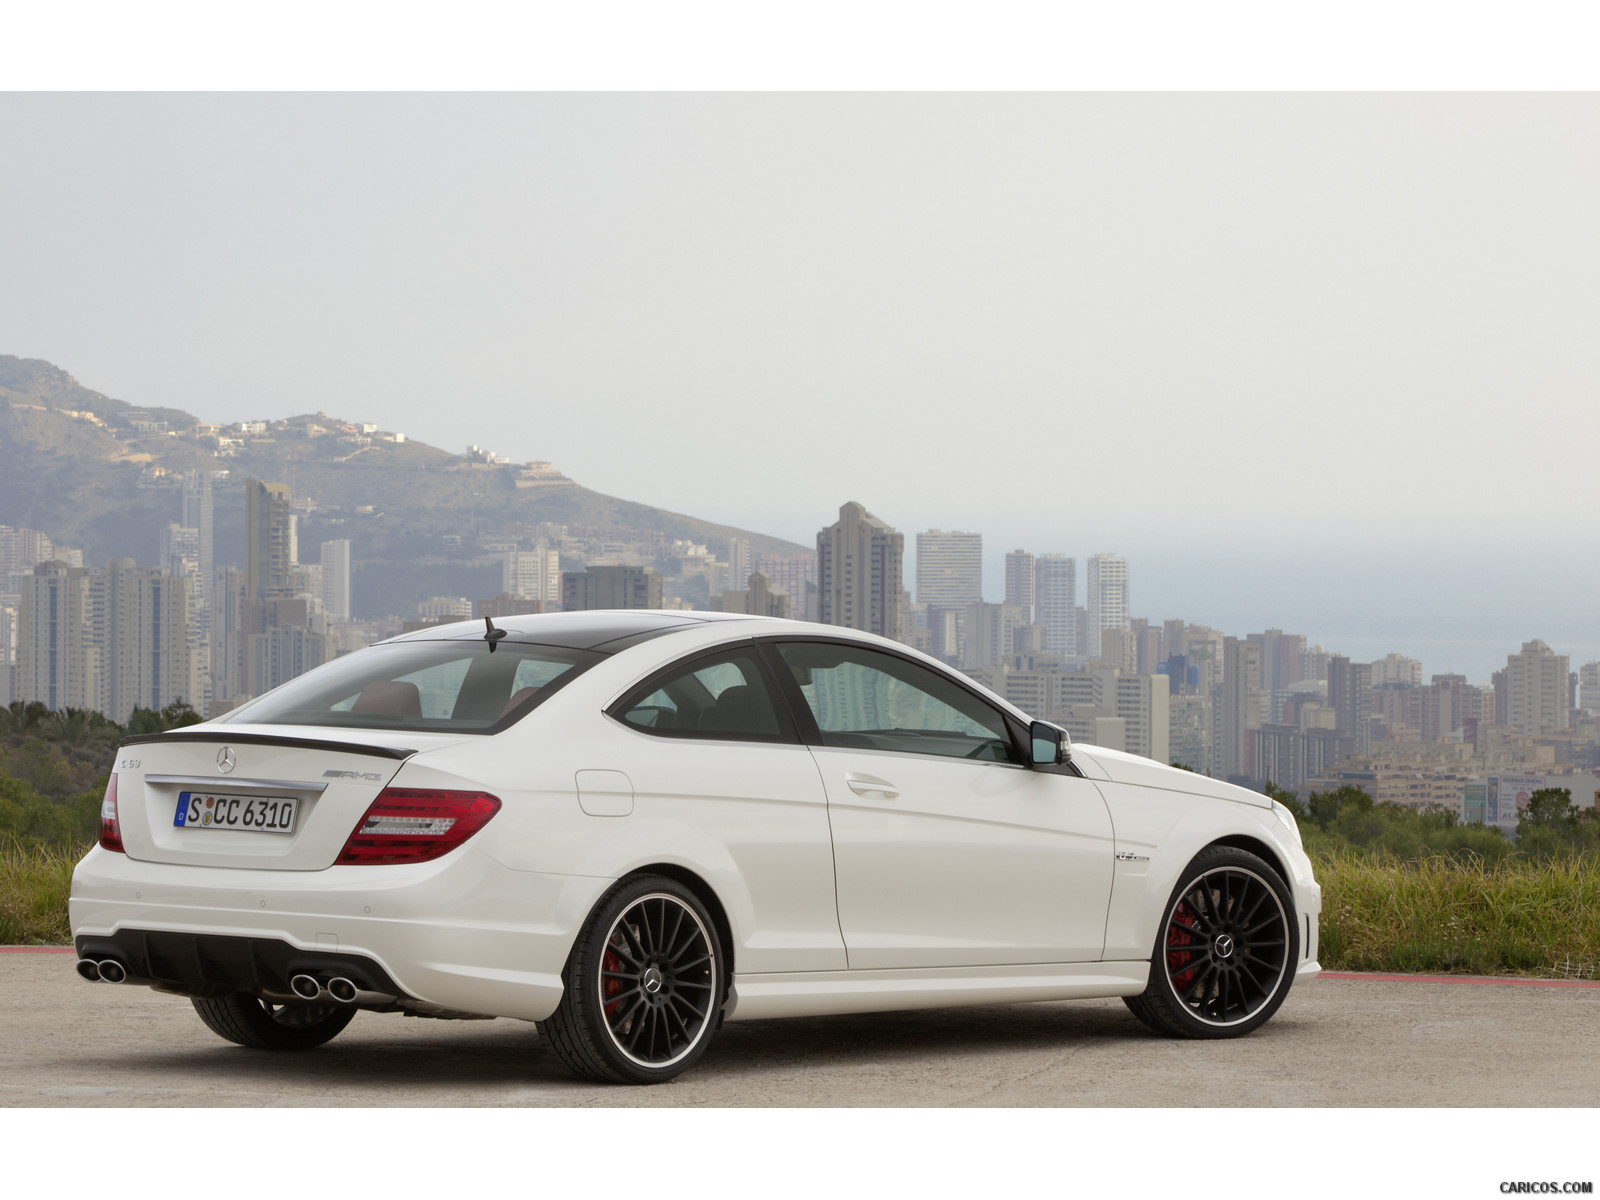 Mercedes-Benz C63 AMG Coupe (2012)  - Rear, #44 of 64